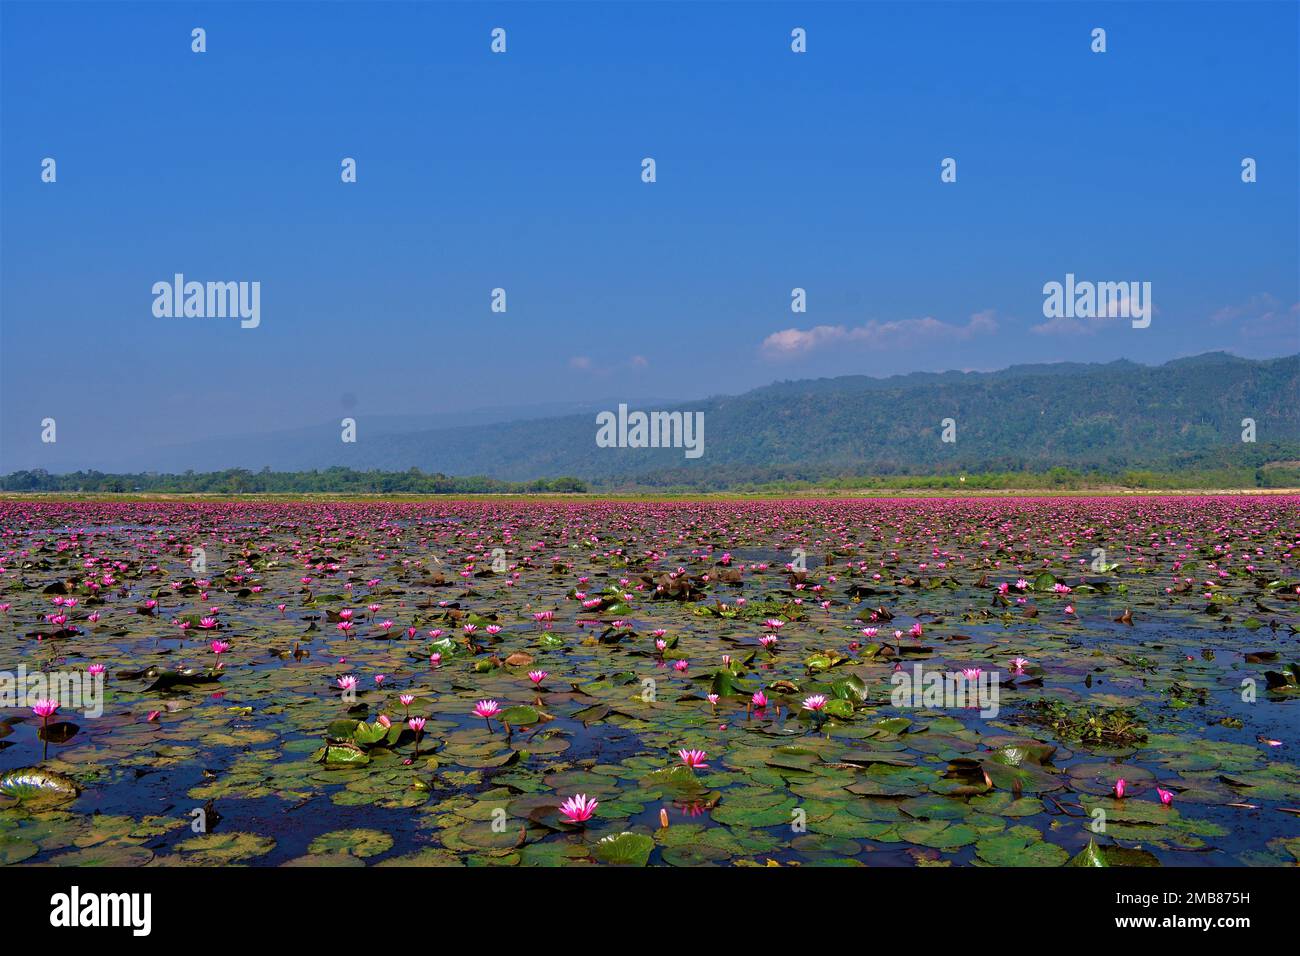 Pink Lily/Lotus blooms in numerous number in Dibir Hawor Bangladesh near Indian Border Stock Photo